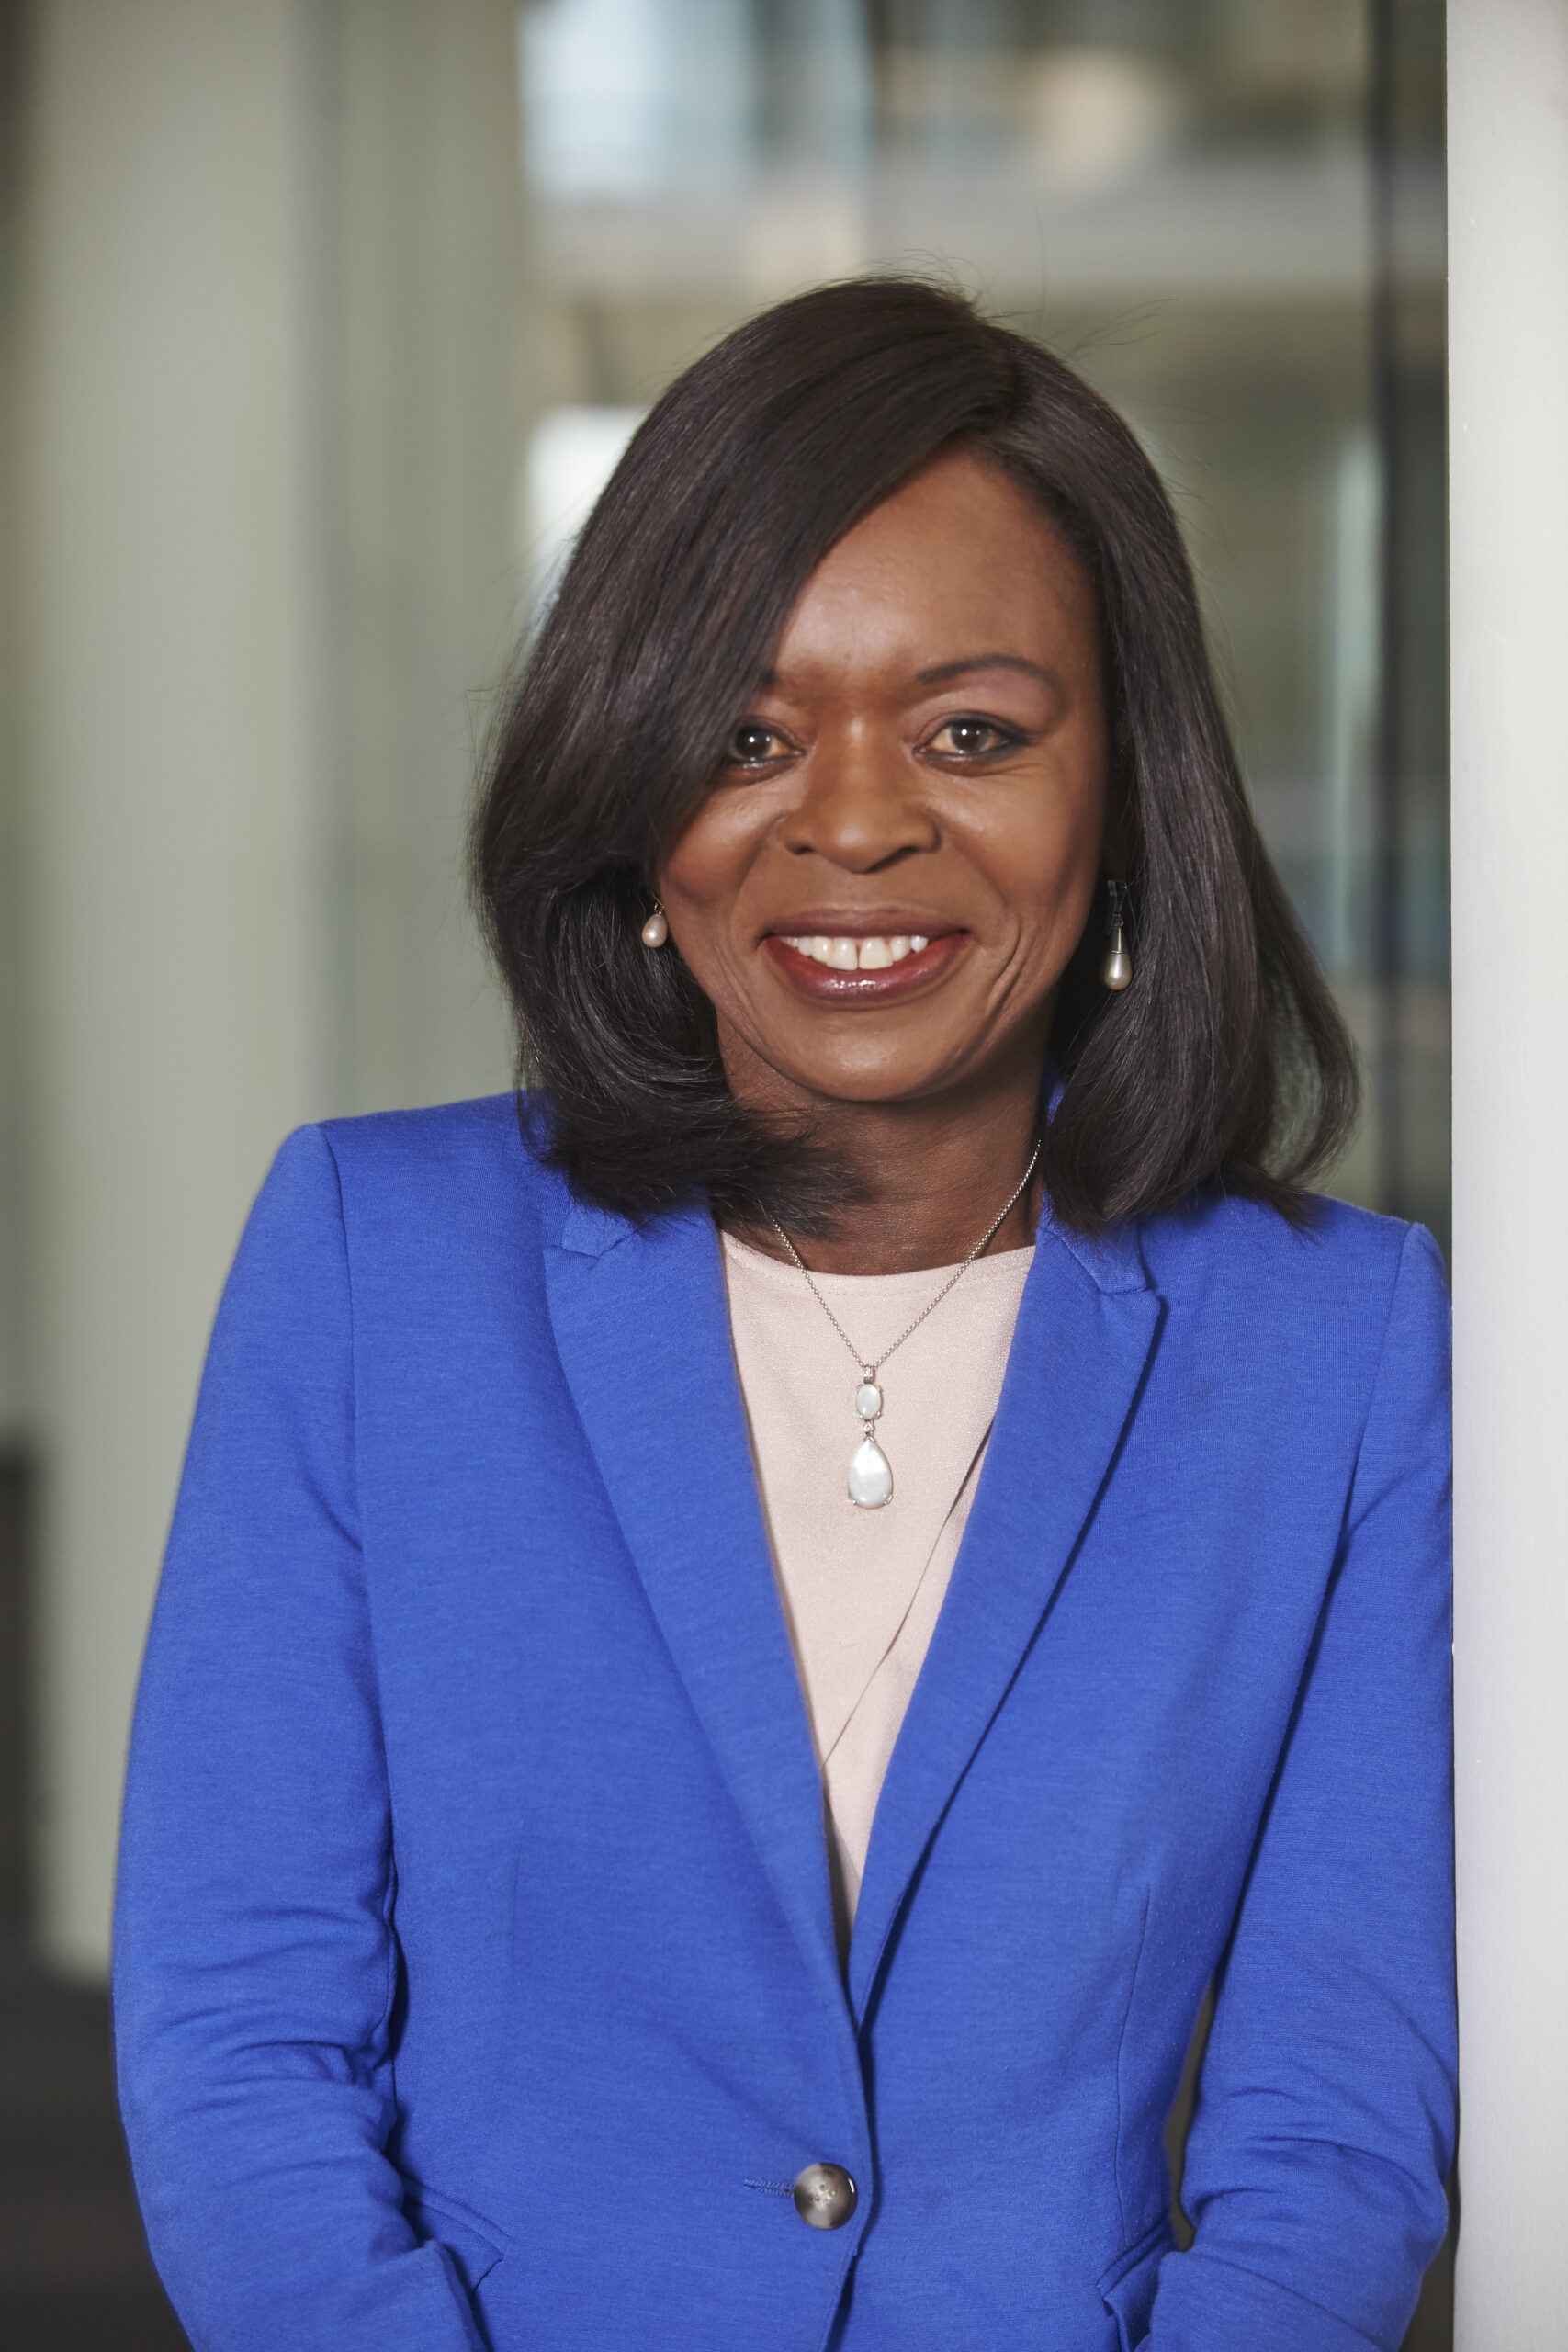 Senior Fellow Ronke Phillips moves to new ITN role